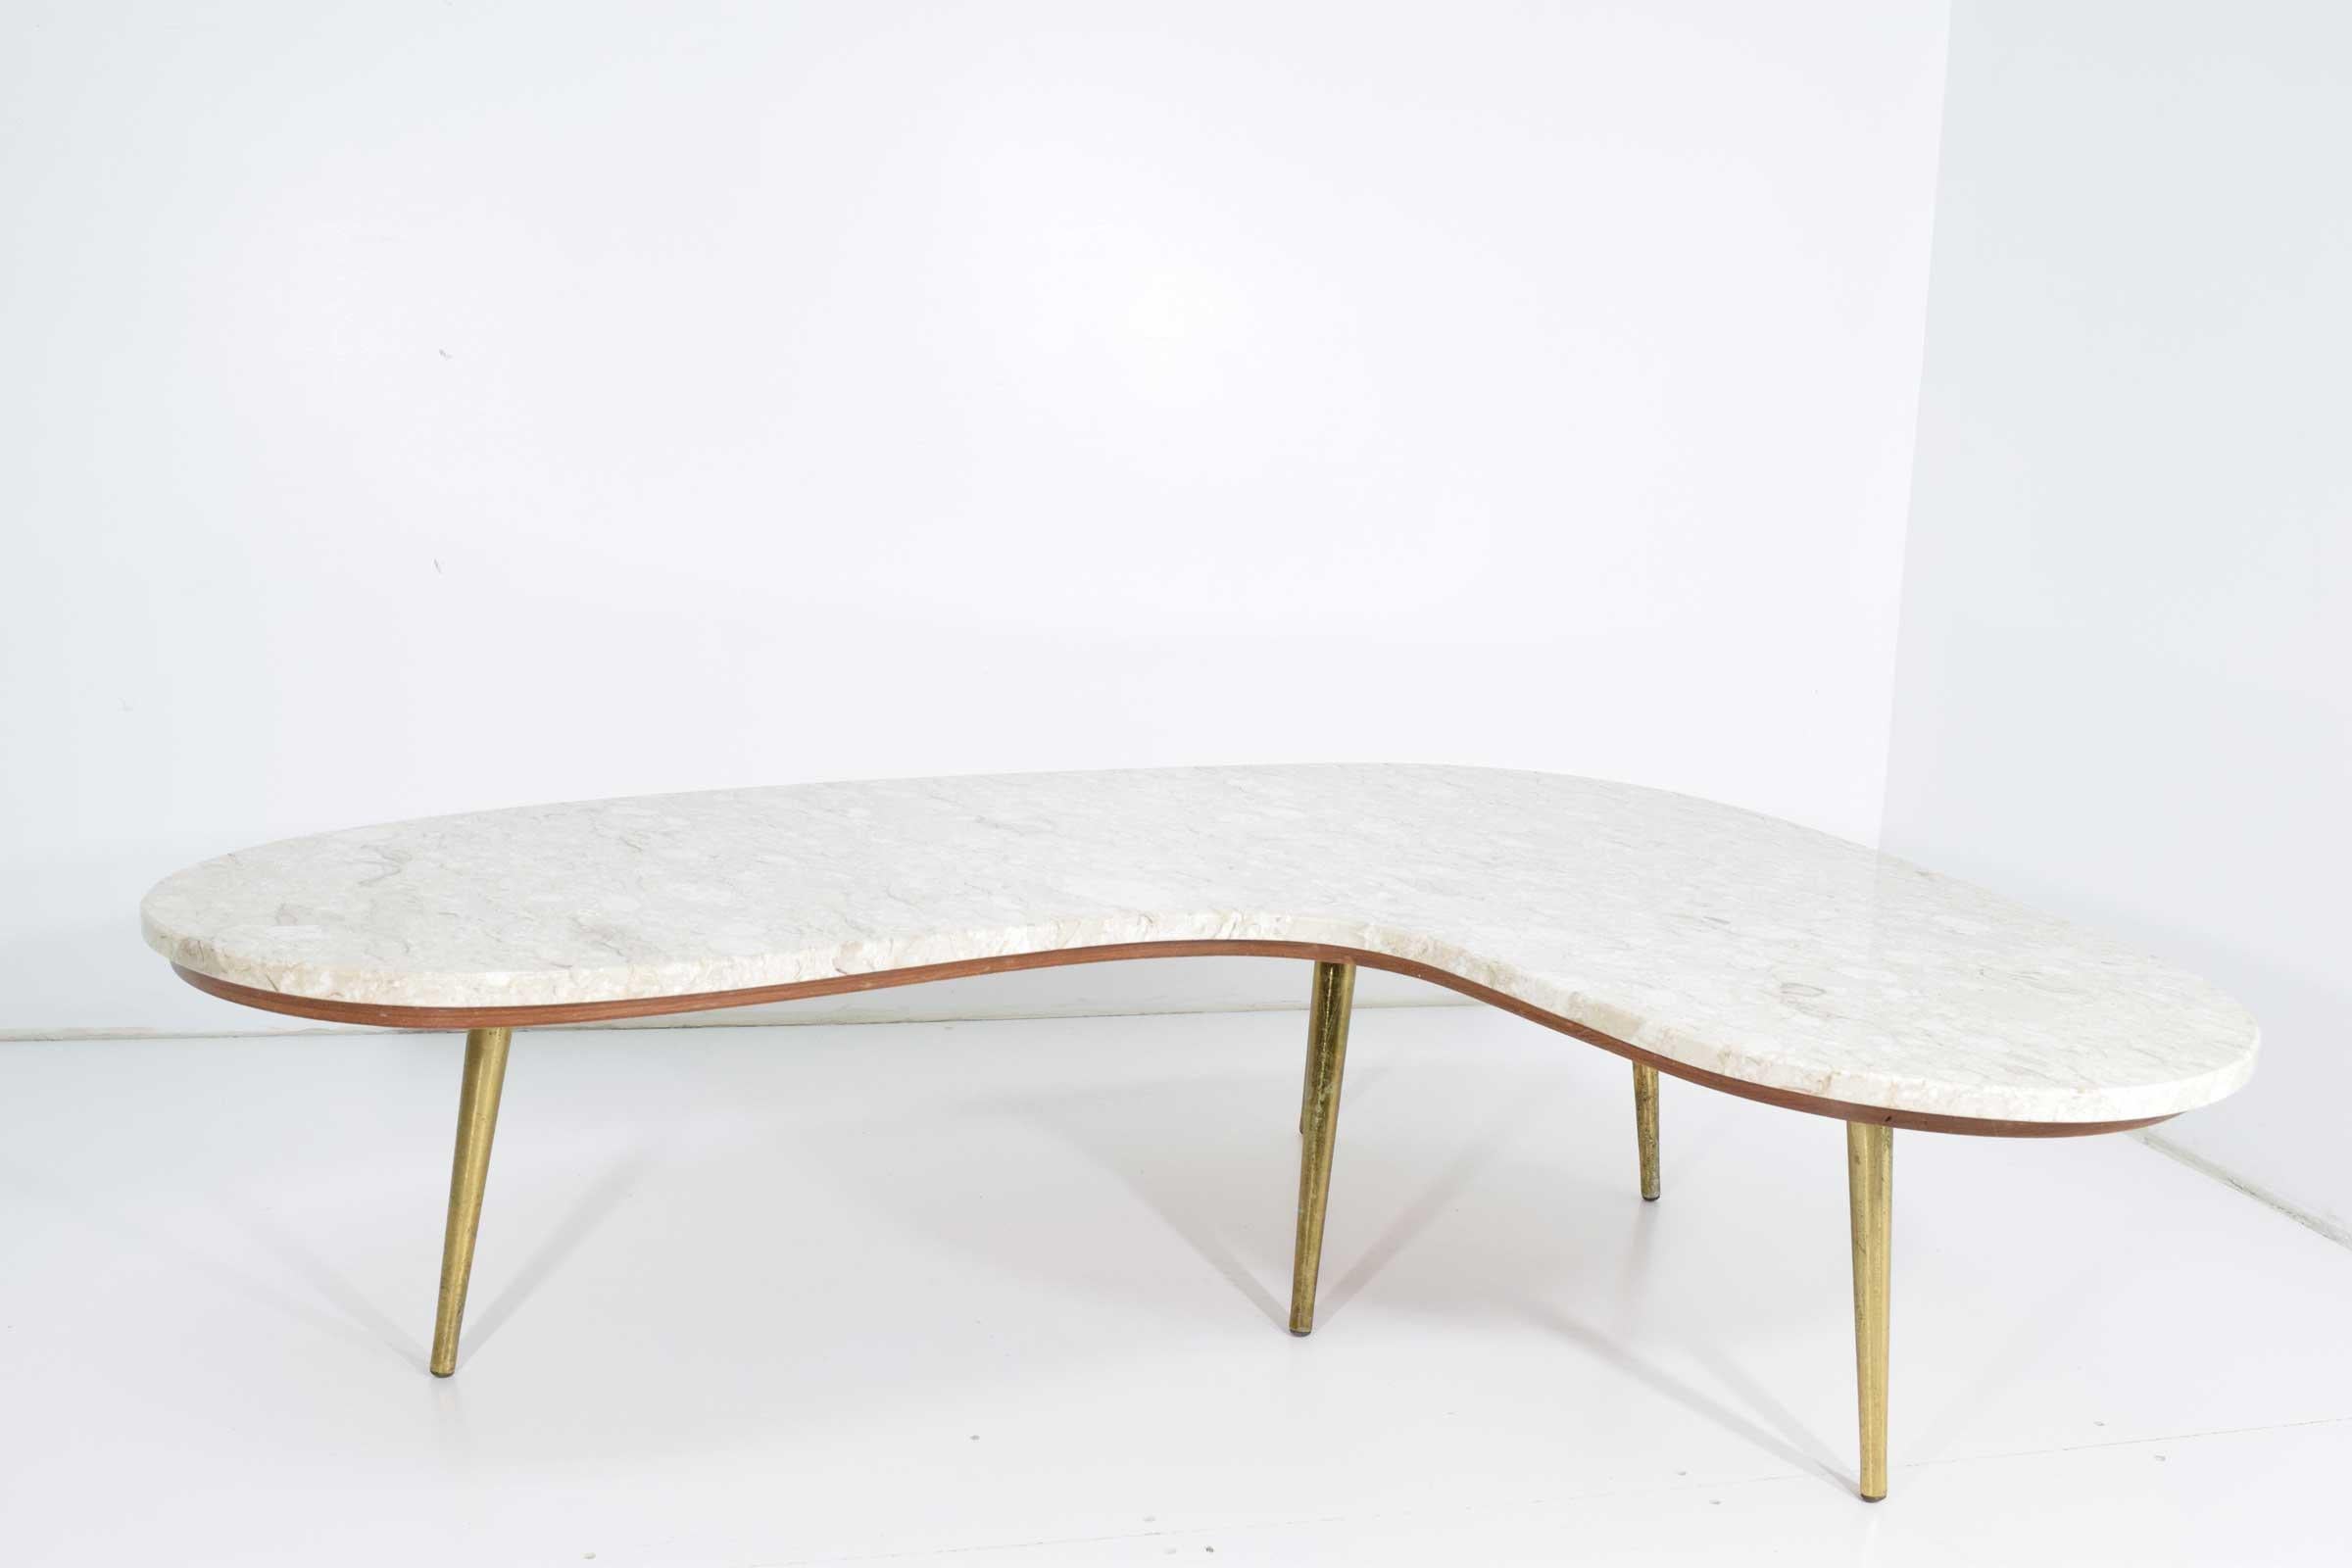 Unique Italian table with brass finish legs and a marble top. Marble rest on a wooden top for added support.